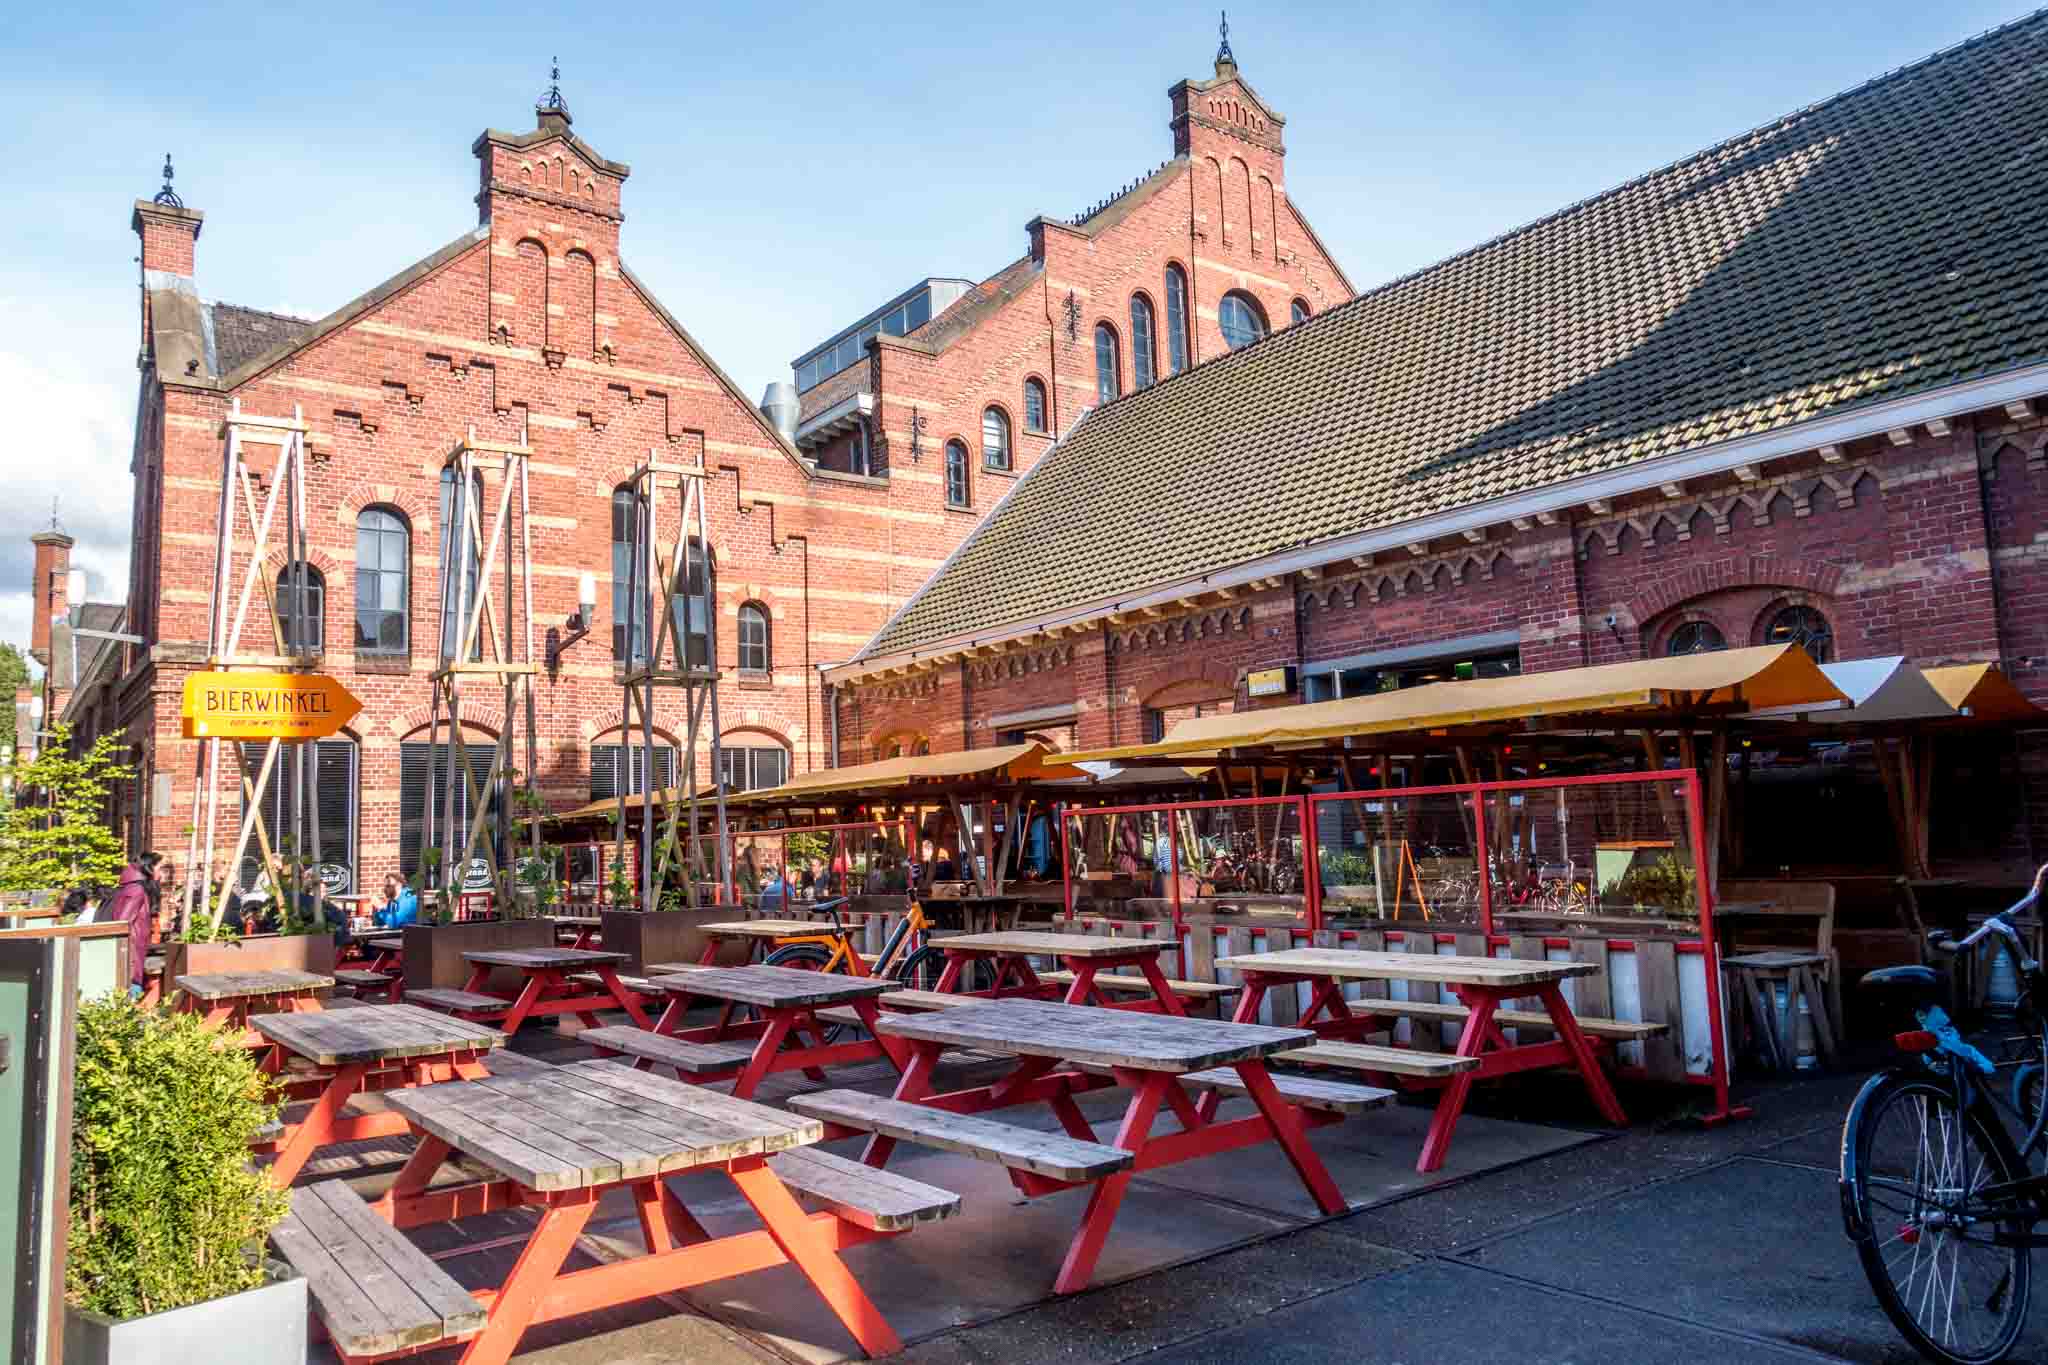 Outdoor seating at a brewery in a red brick building.